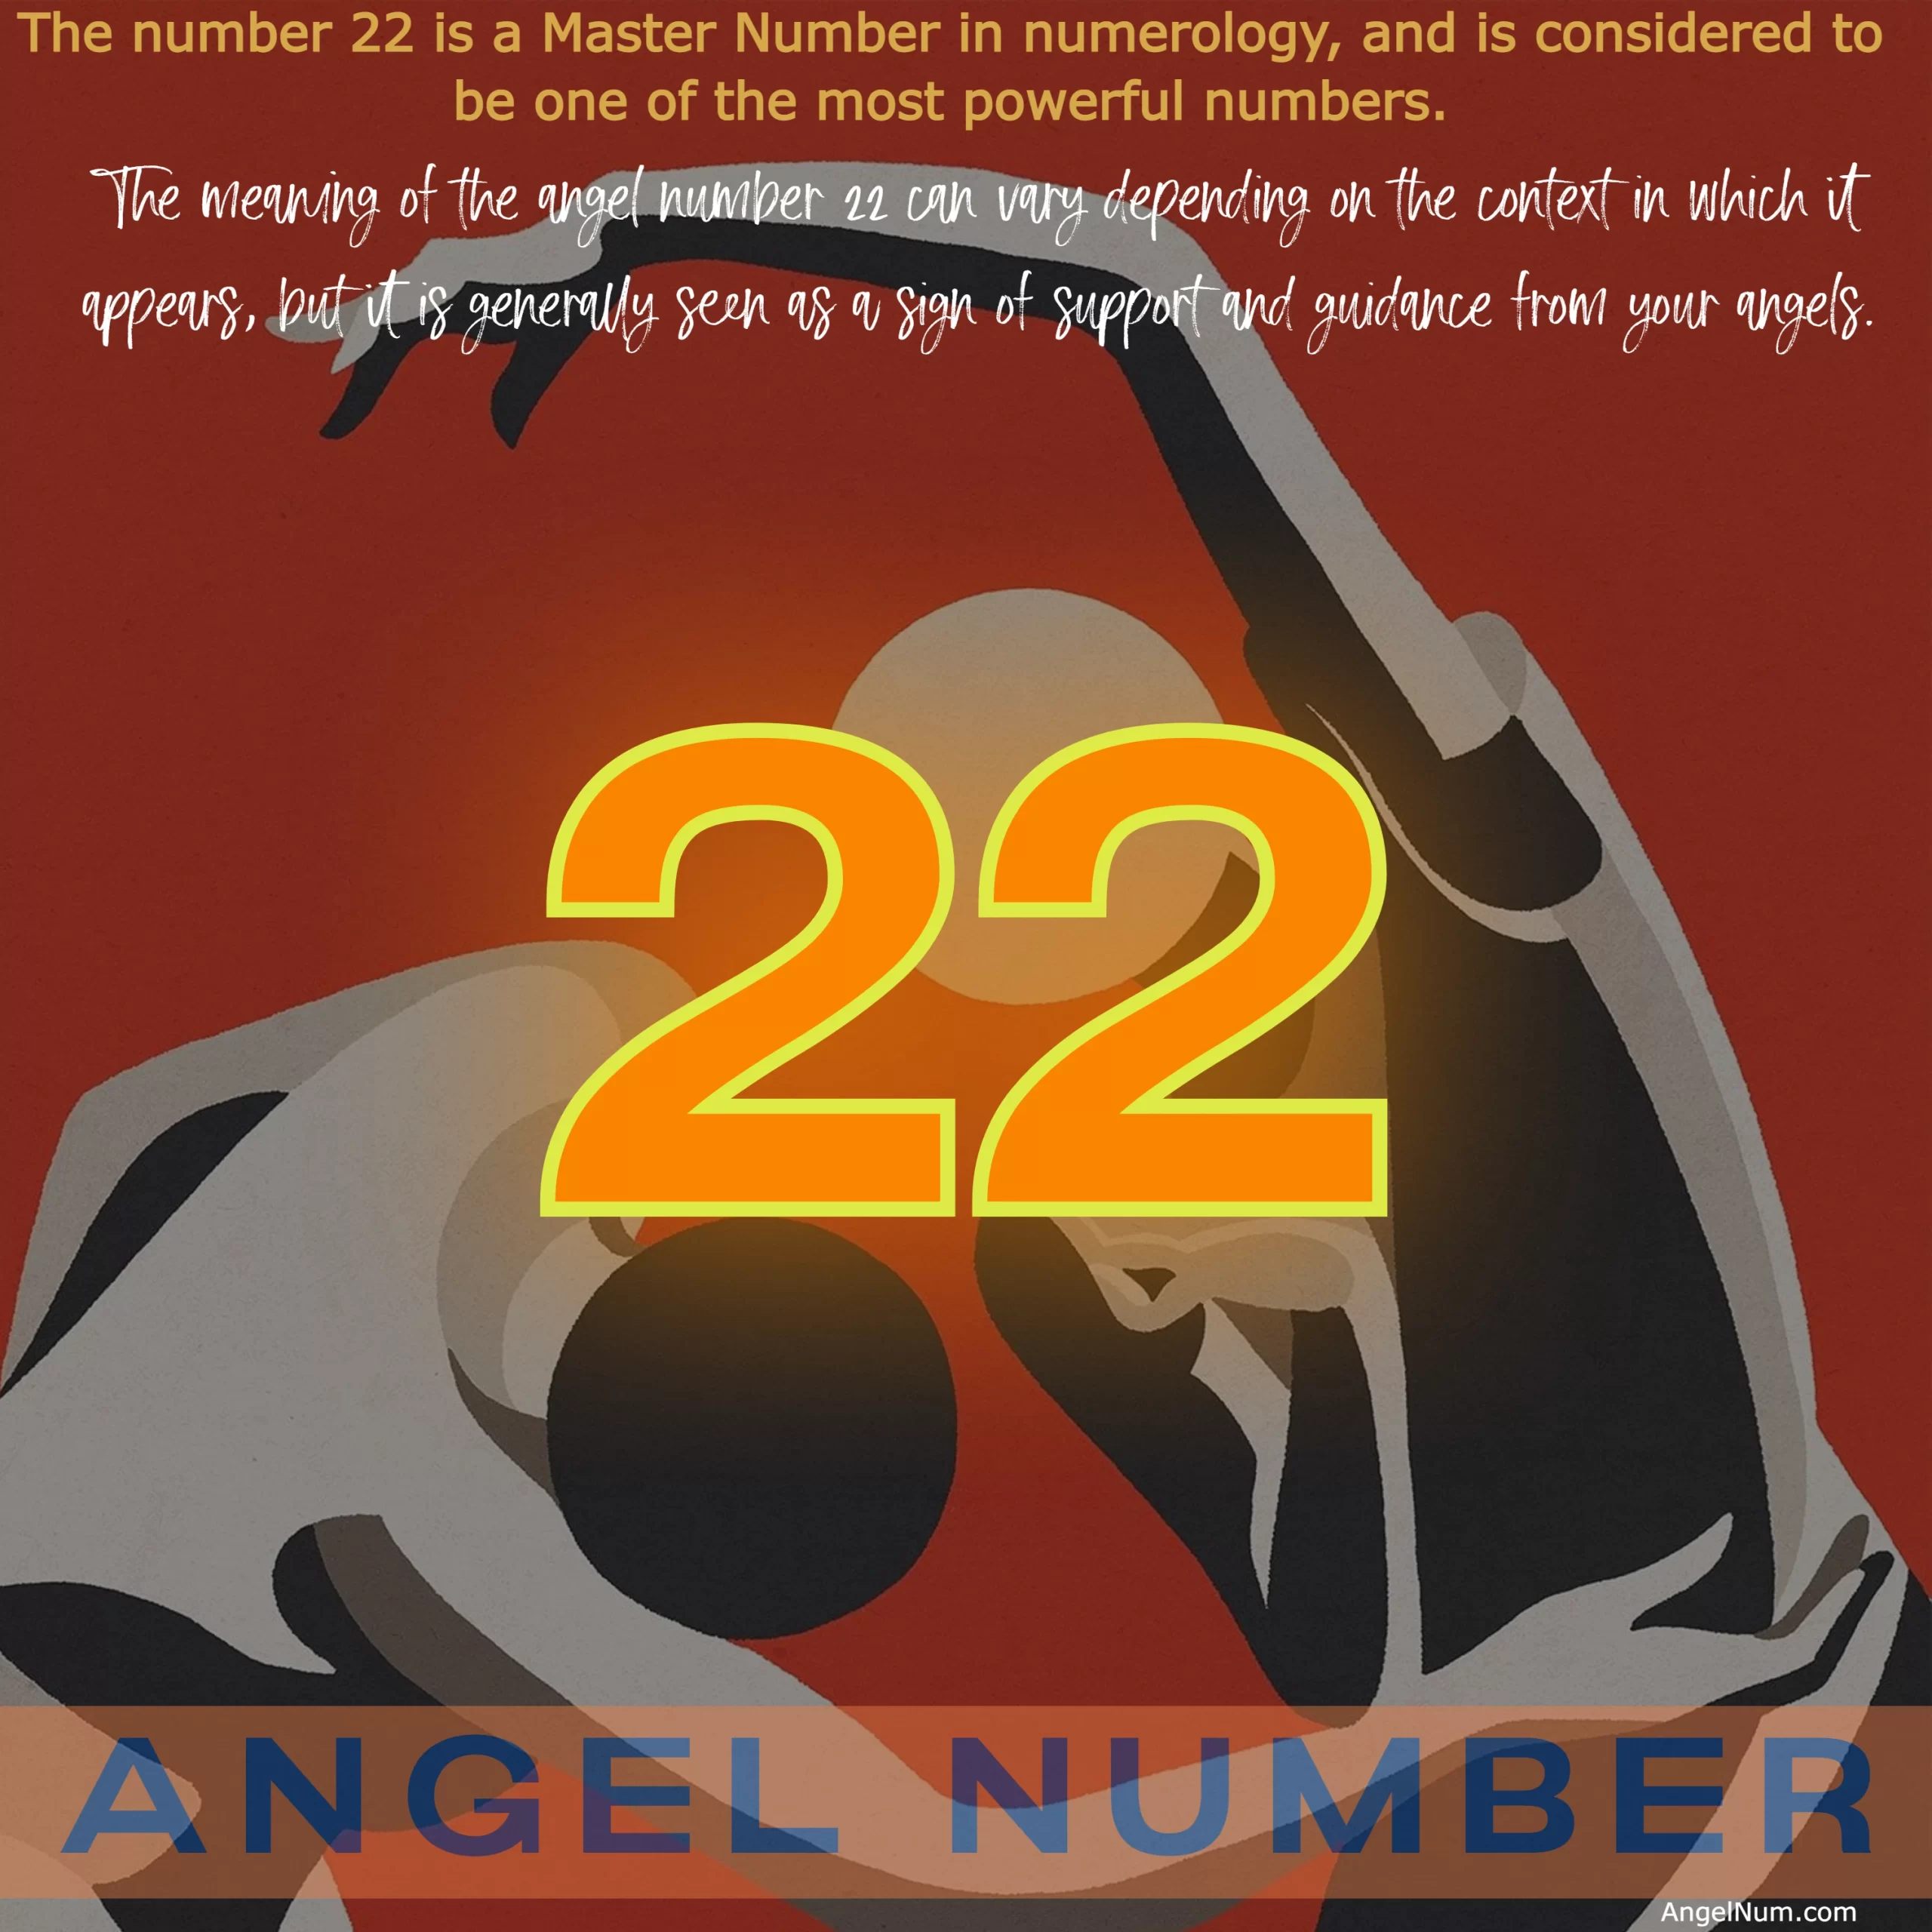 angel-number-22-and-how-to-harness-its-power